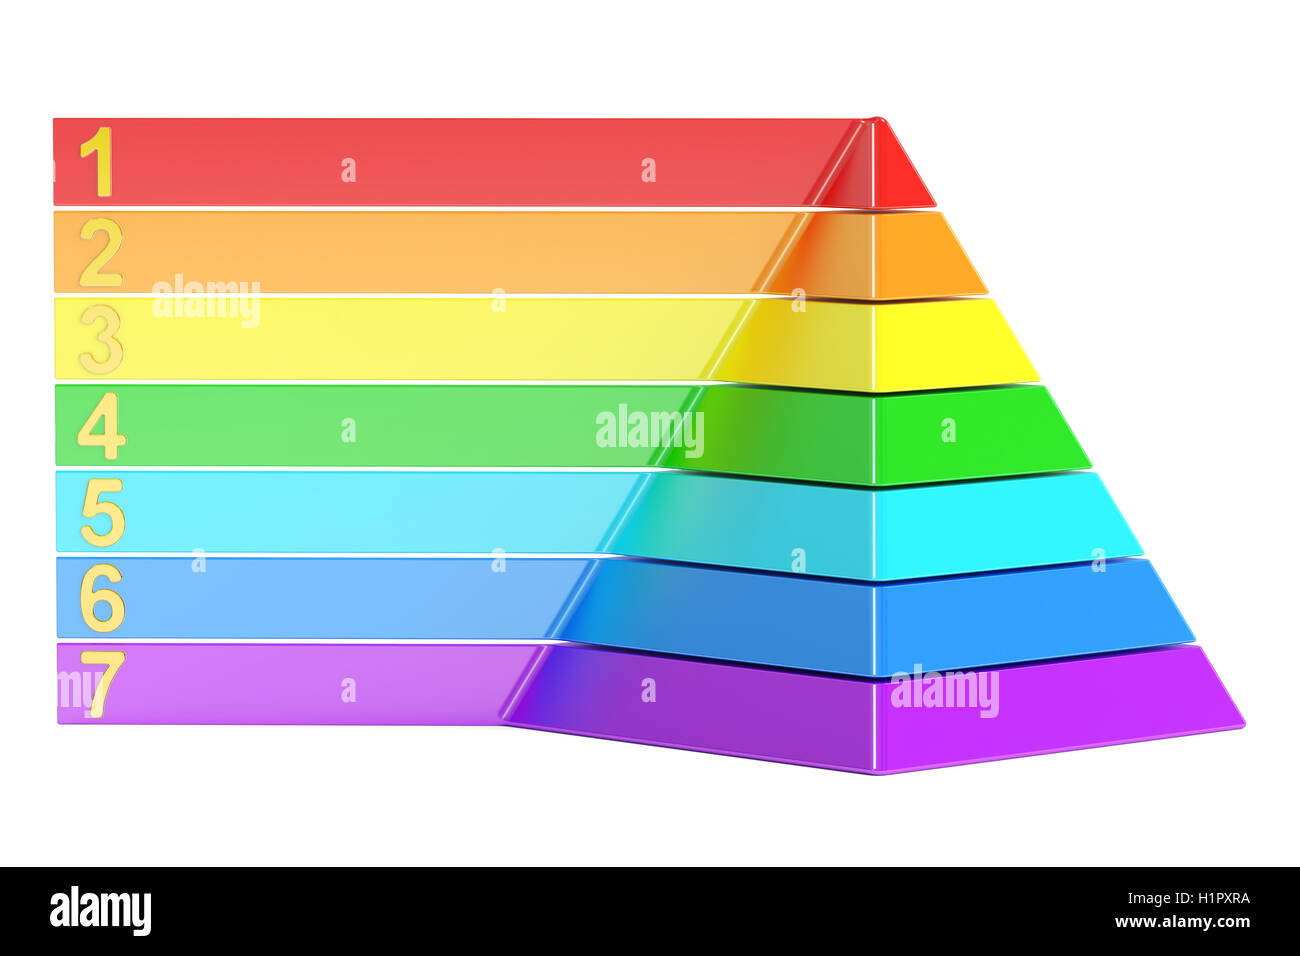 pyramid with color levels, pyramid chart. 3d rendering isolated on white background Stock Photo